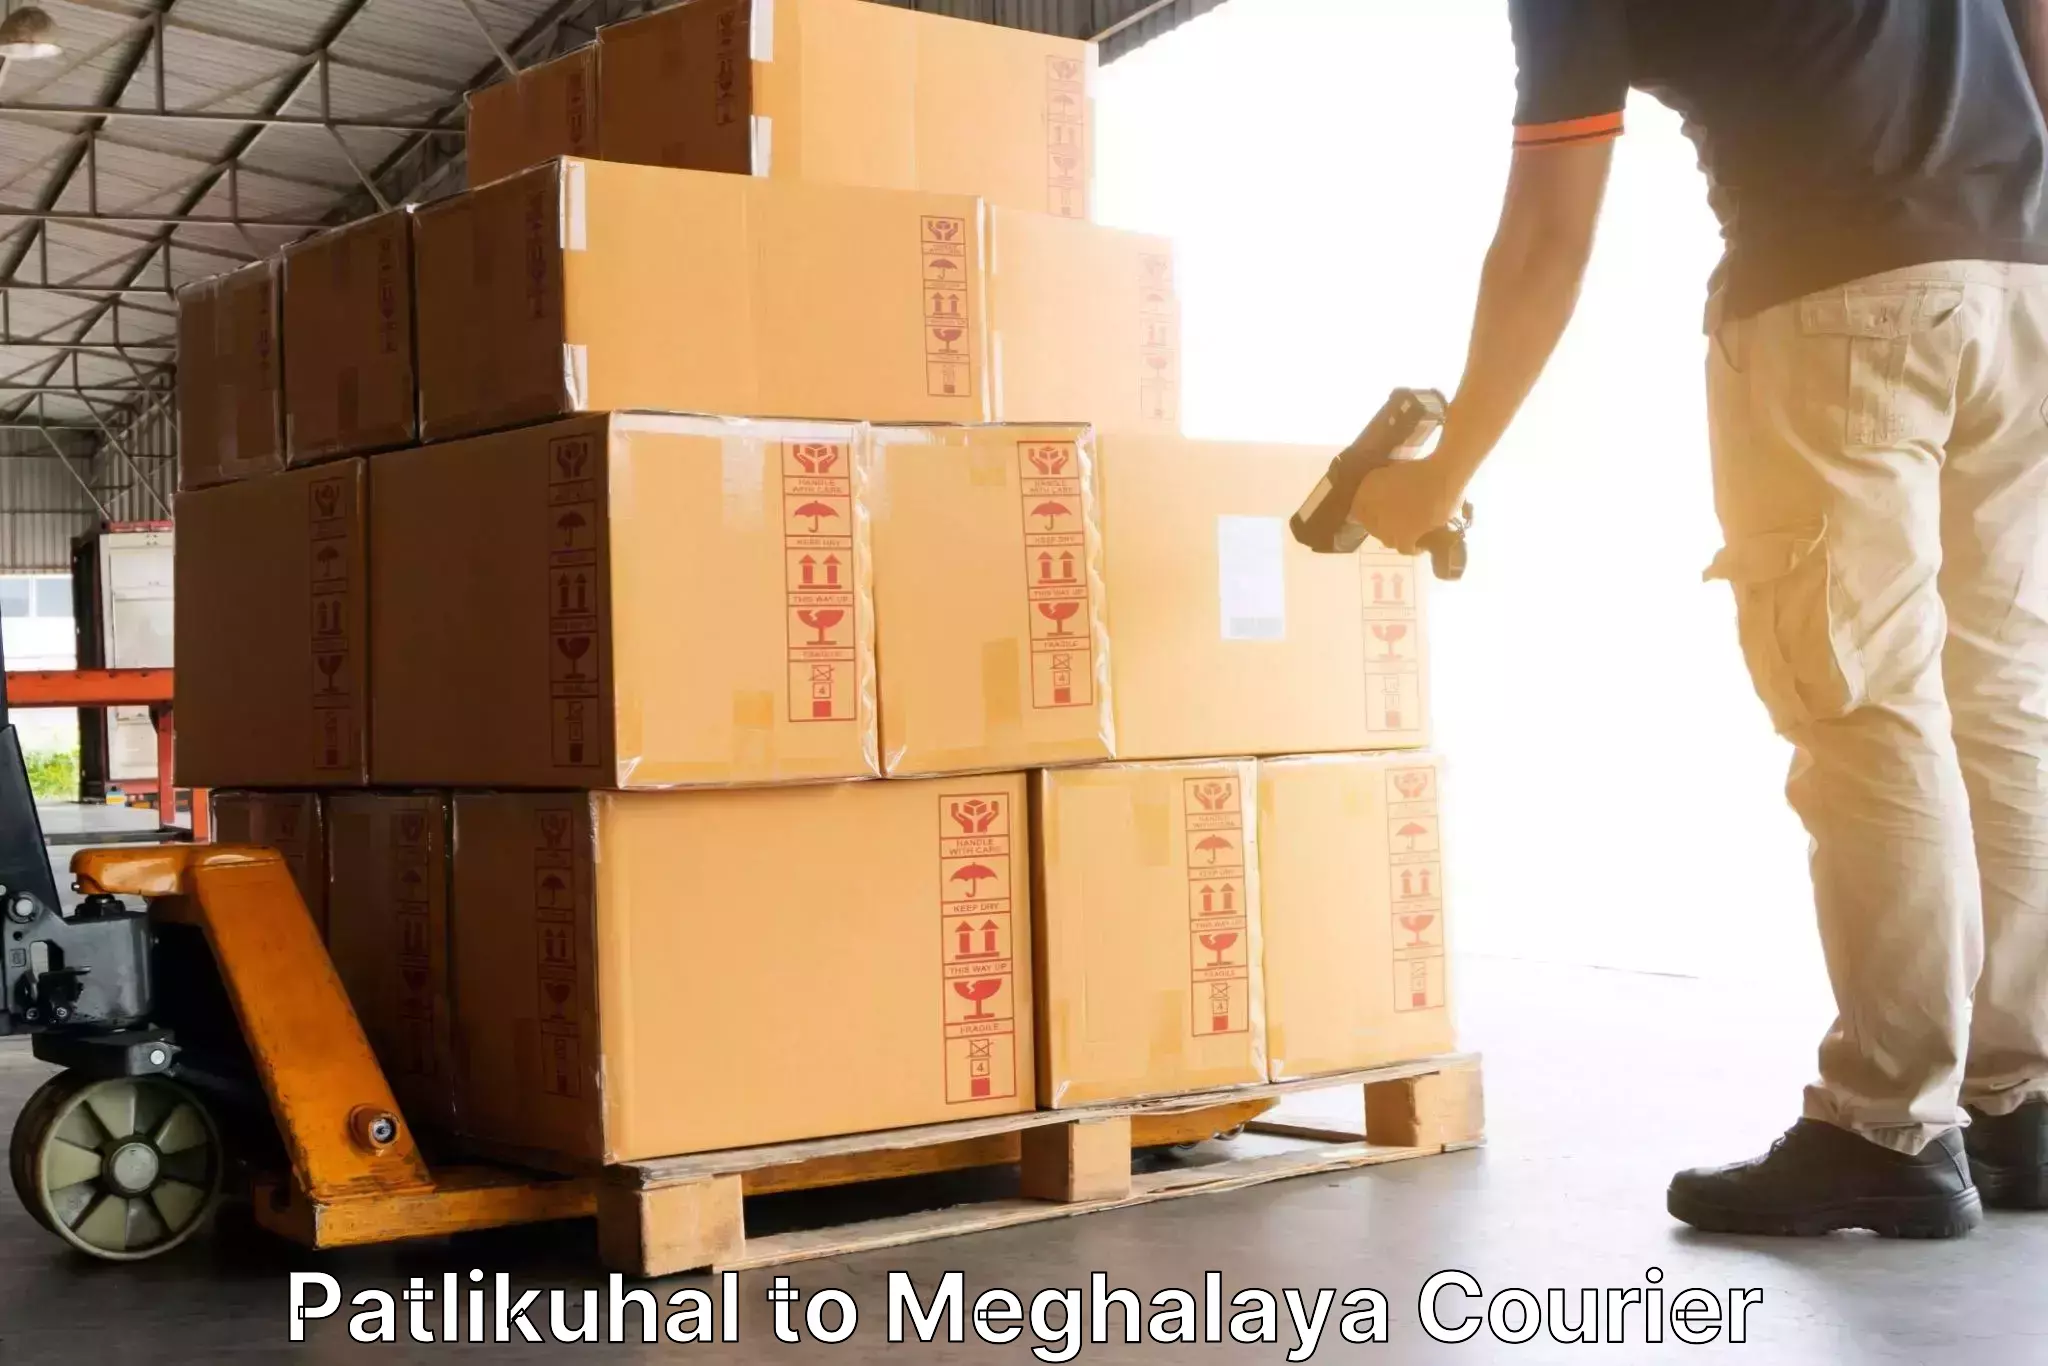 Full-service courier options Patlikuhal to Meghalaya